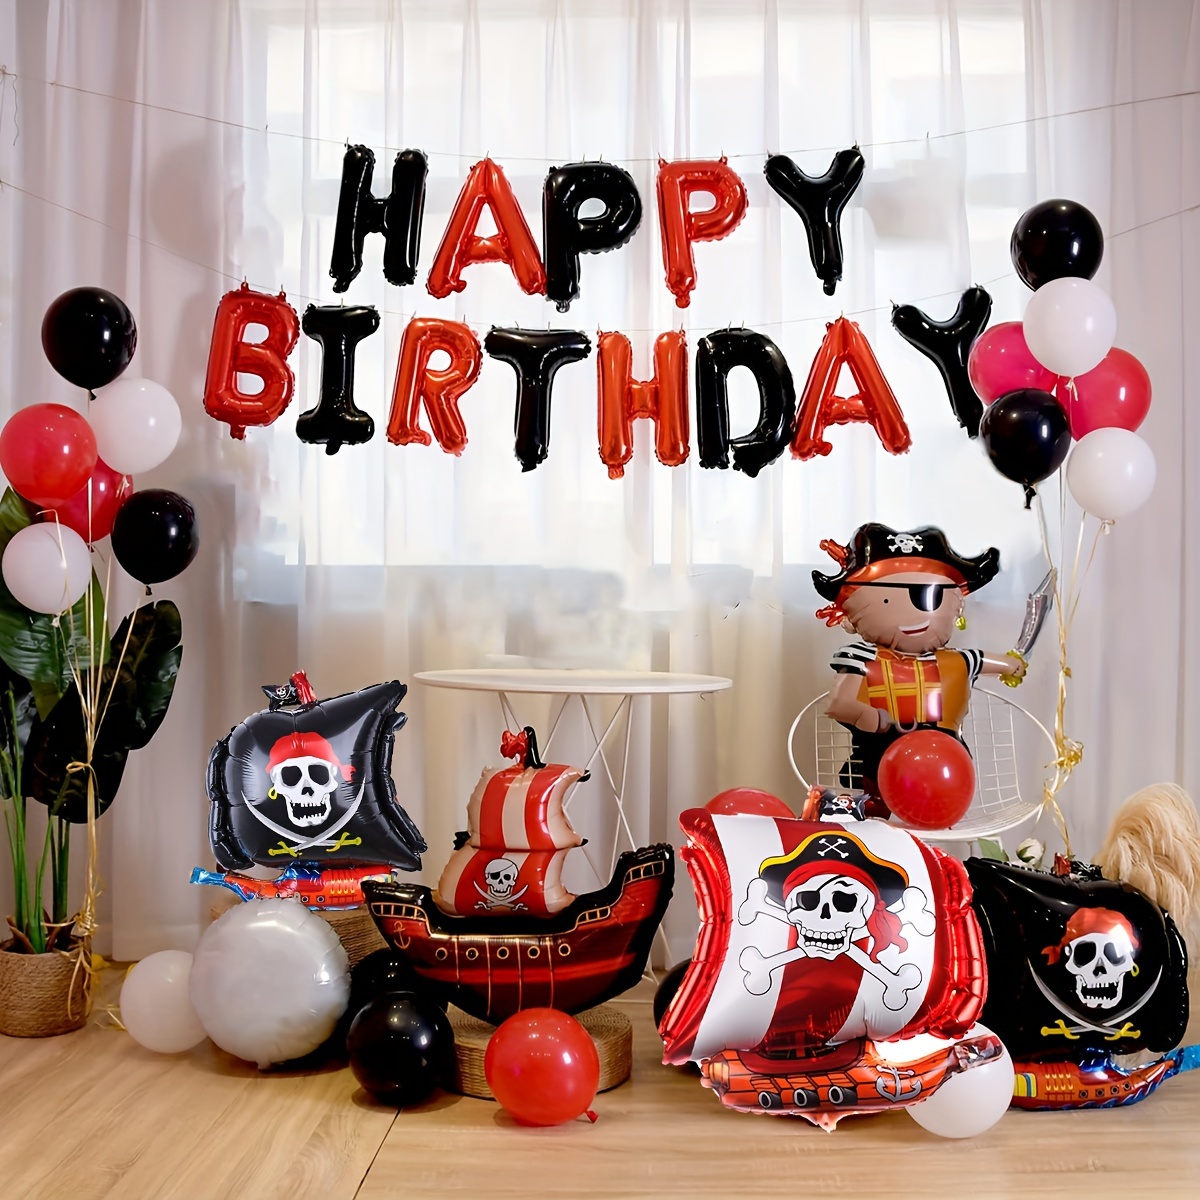 Pirate Themed Birthday Banner Party Decorations Pirate Birthday